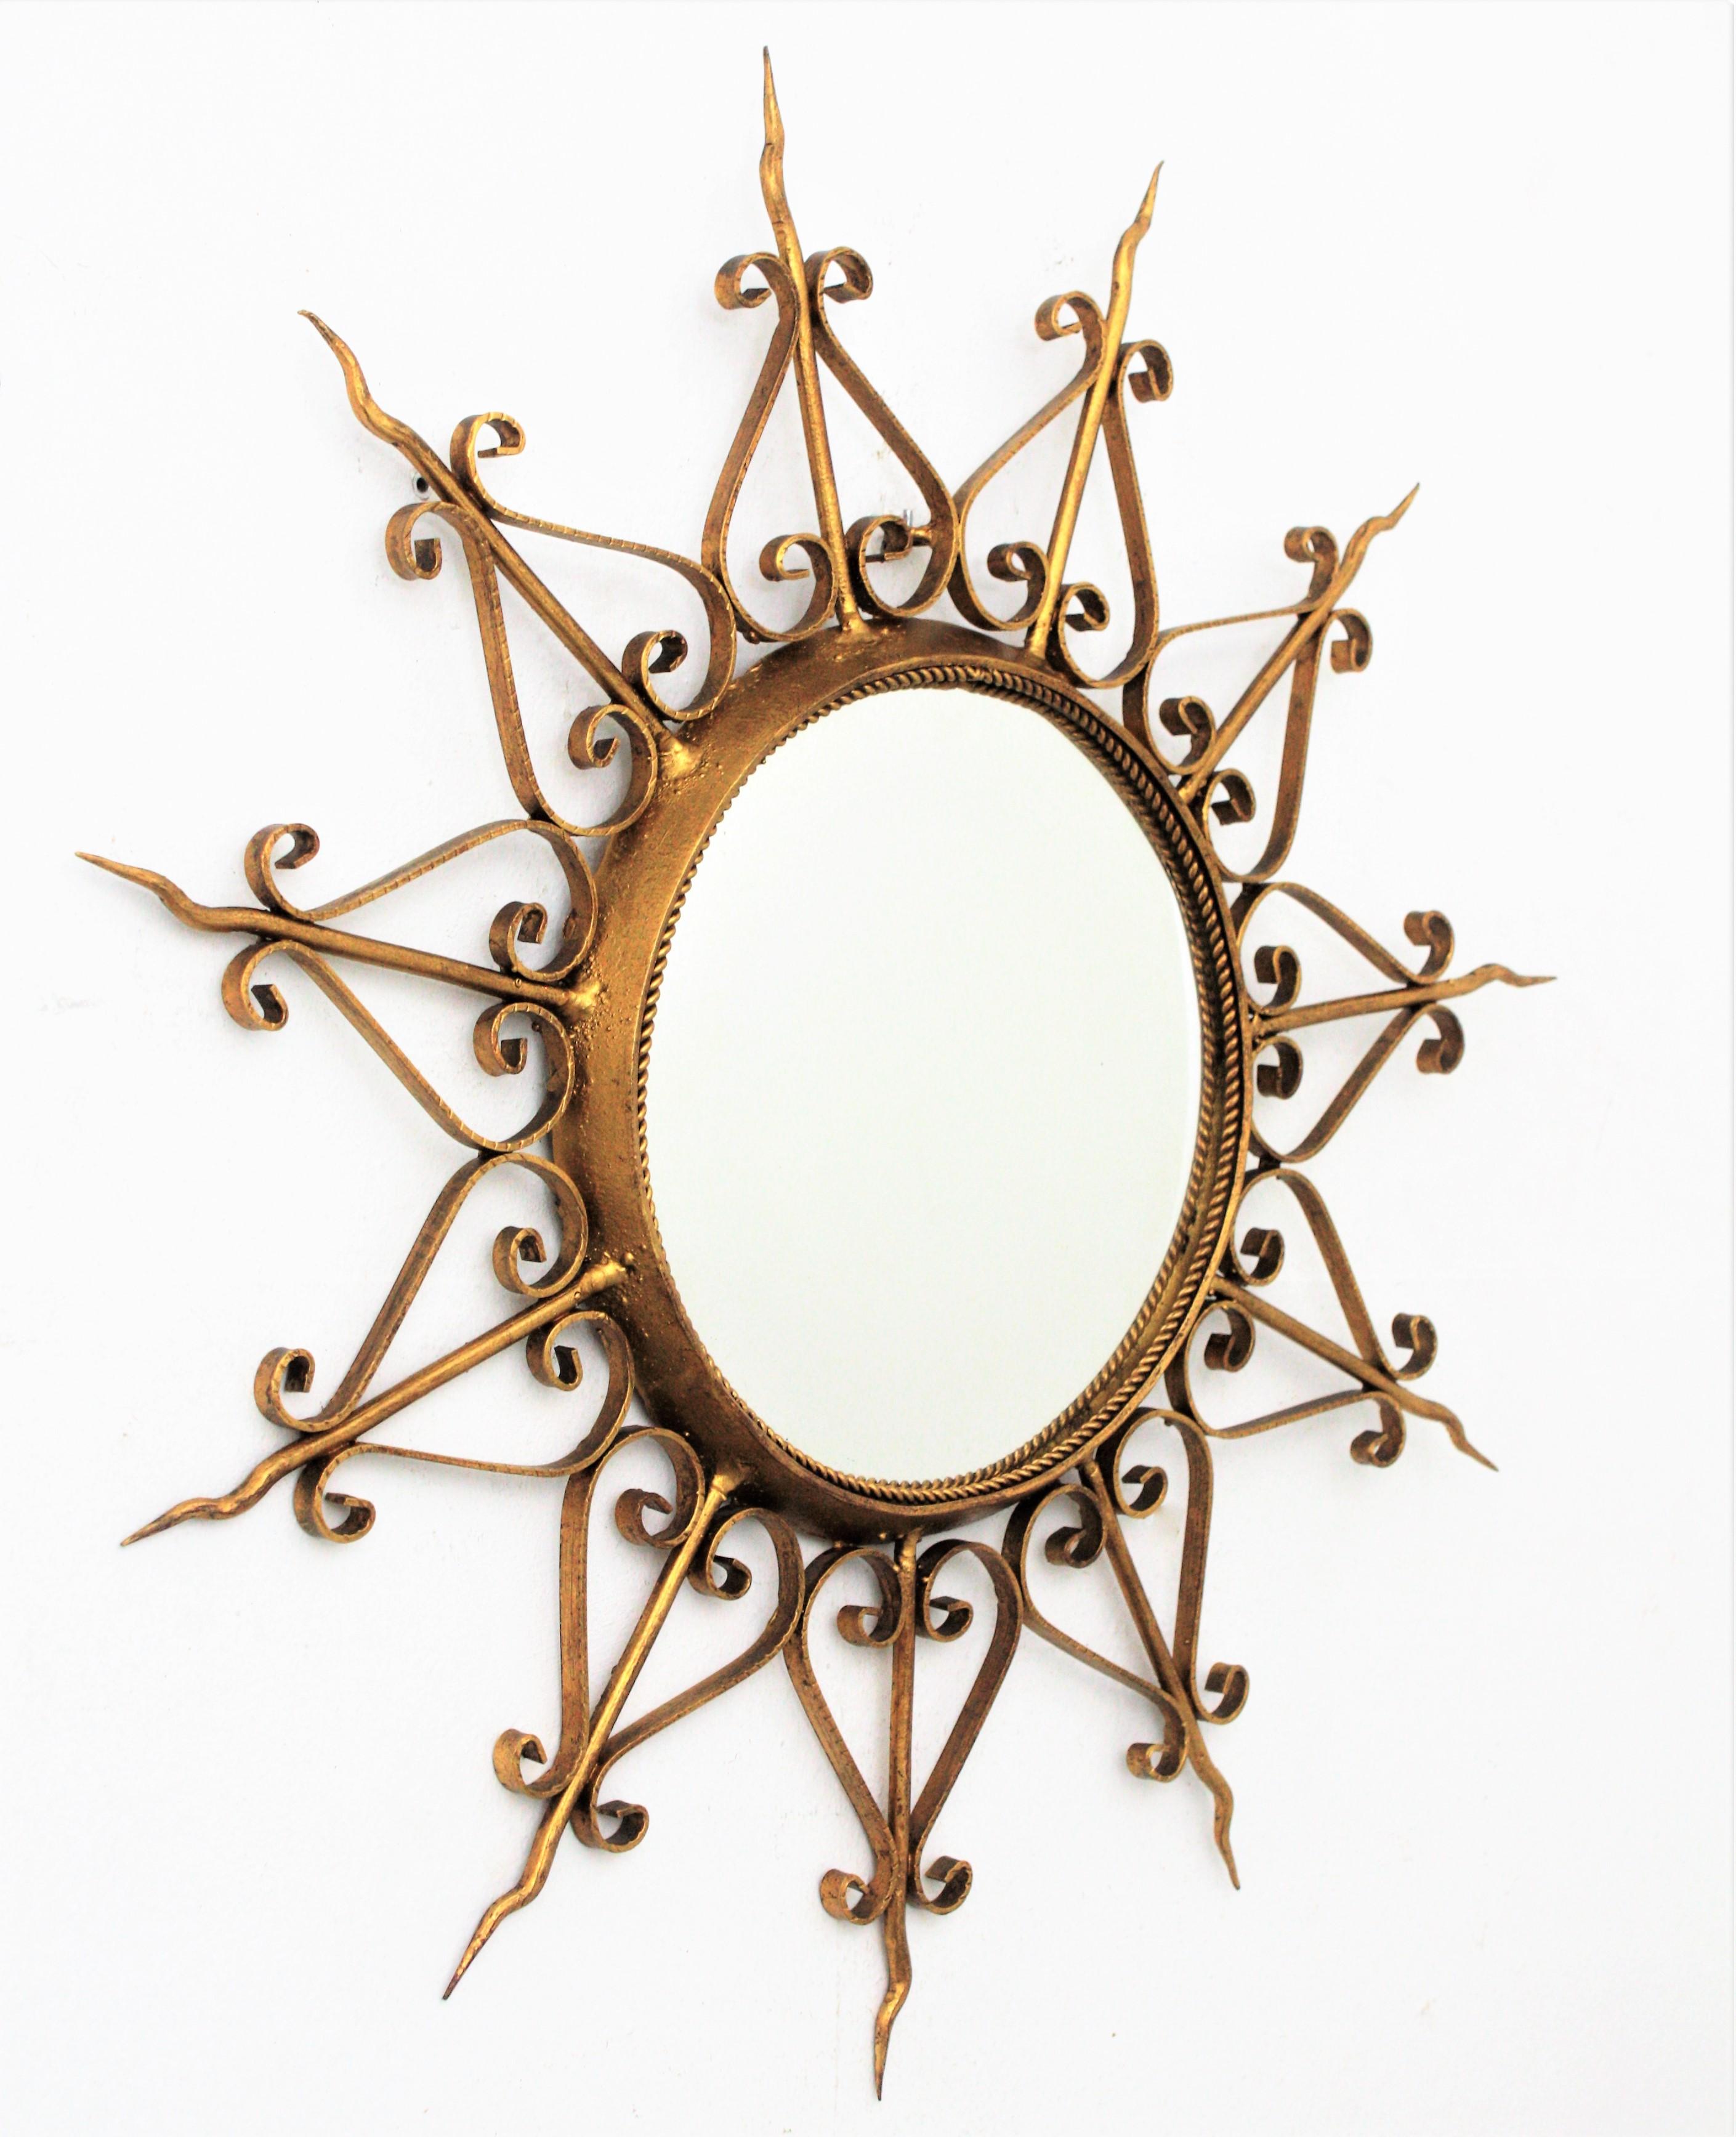 Hand-hammered gilt iron sunburst mirror with ornamented frame and convex glass. Spain, 1950s.
This highly decorative mirror shows a beautiful gilt aged patina and scroll motifs adorning the rays. Interesting to be placed alone or with other